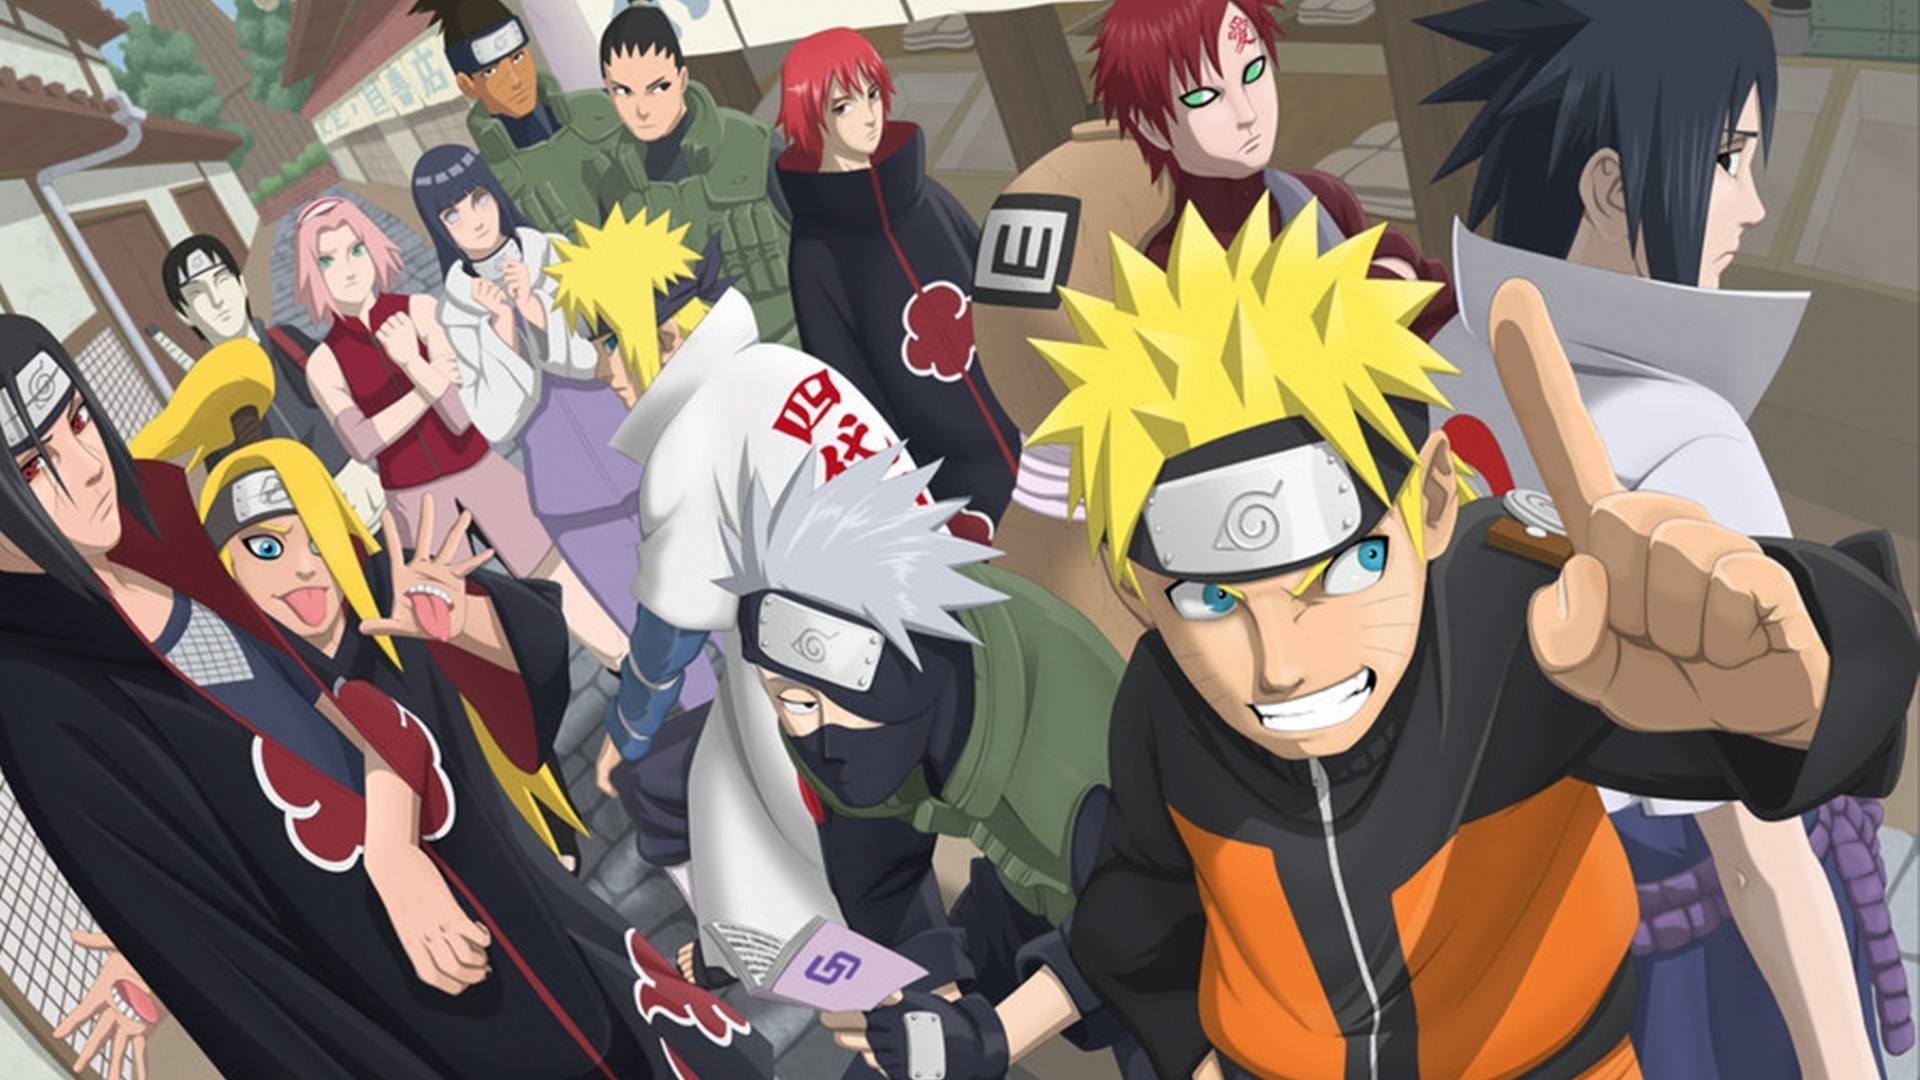 1920x1080 1920x1200 Naruto Characters, Wallpapers, Google Search, Demons, Fox, Photo  Backgrounds, Wall Papers, Tapestries, Backgrounds